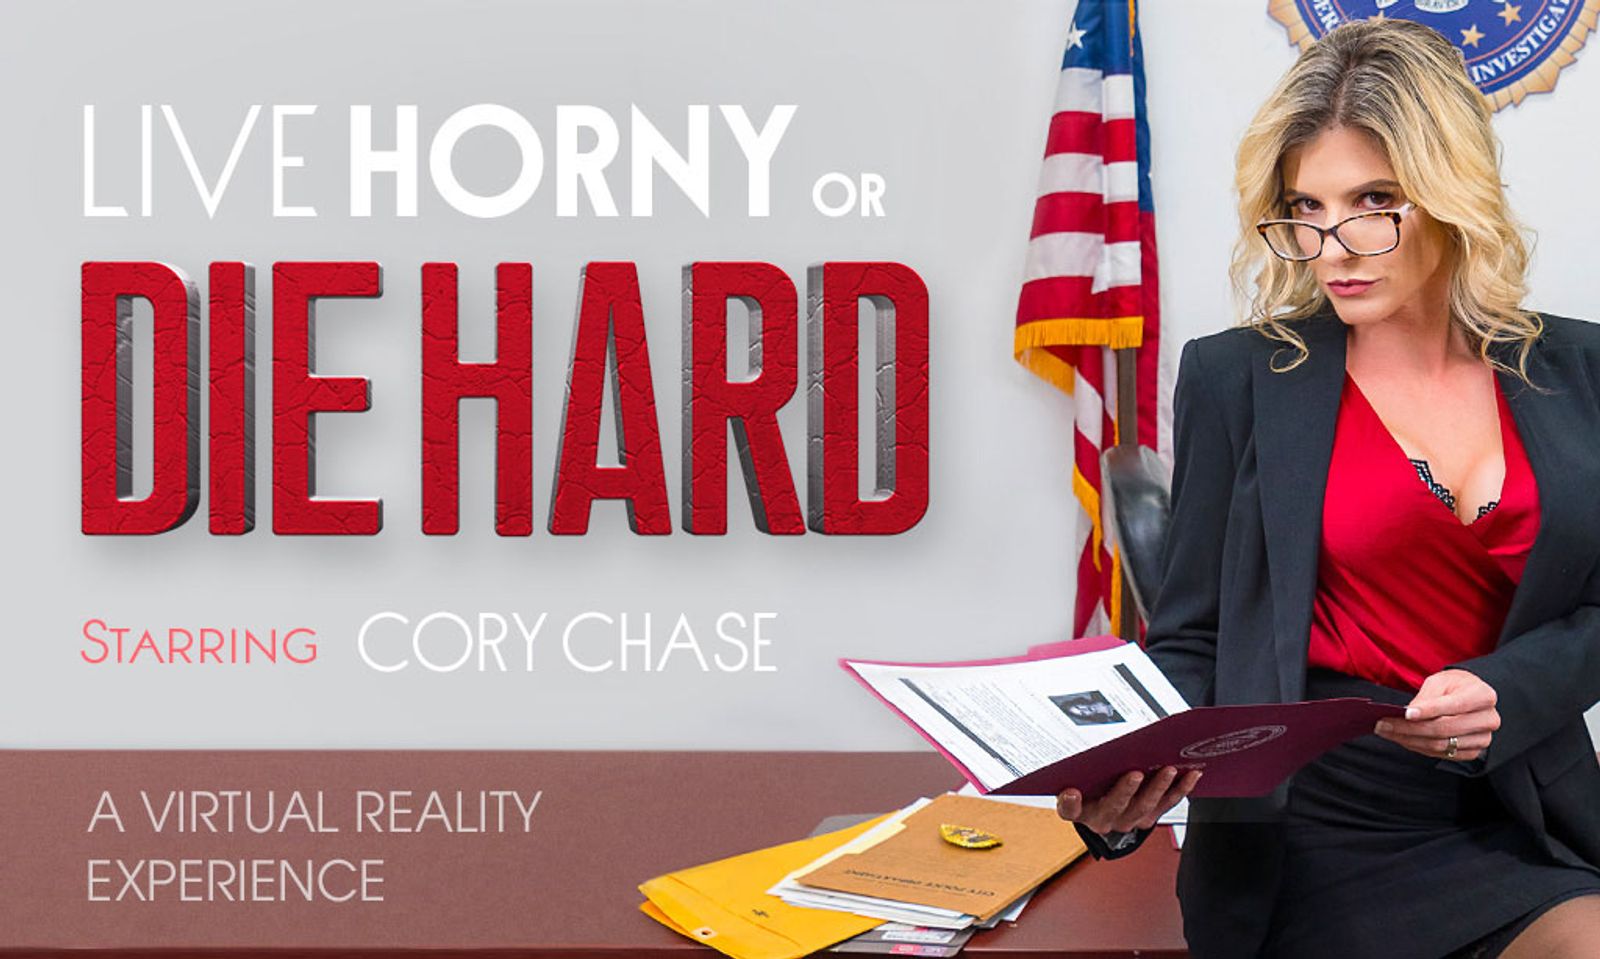 arati basnet recommends cory chase vr pic